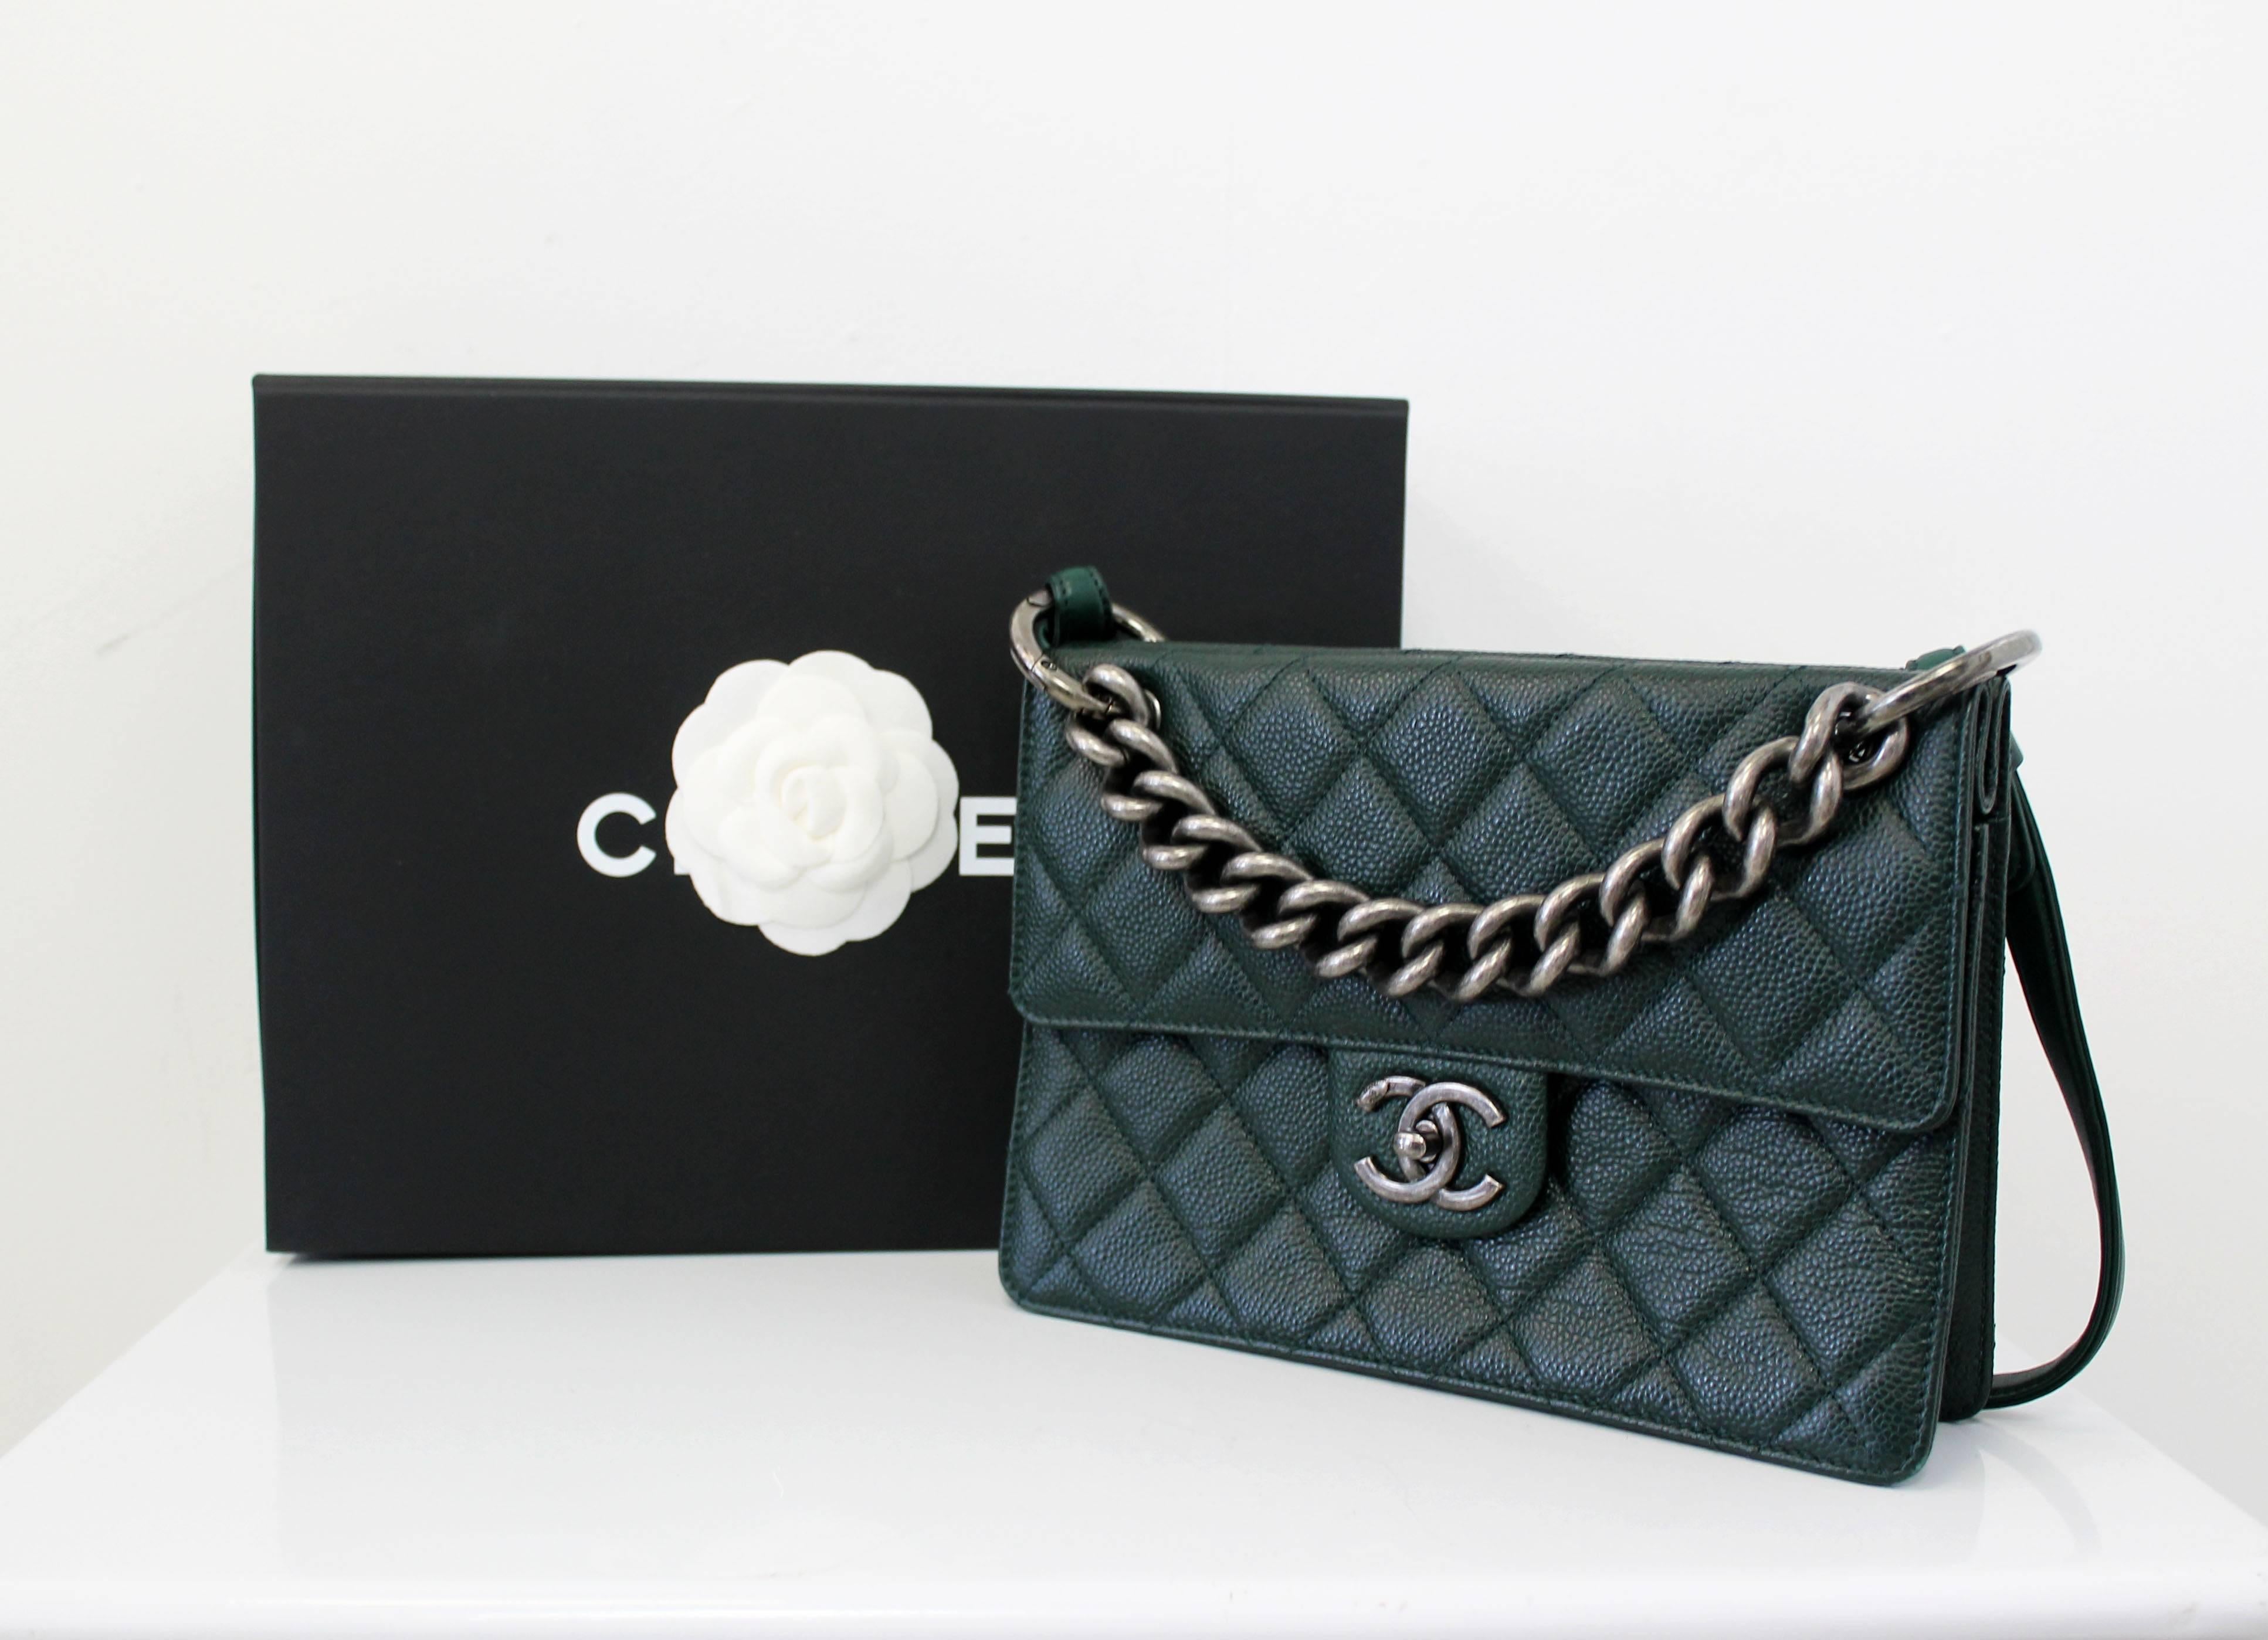 CHANEL 2015 / 2016
Dark Green Quilted Caviar Leather Retro Class Medium Flap Bag 
This stylish and functional Chanel Black Quilted Caviar Leather Retro Class Medium Flap Bag makes a perfect everyday bag. 

It features Green quilted caviar